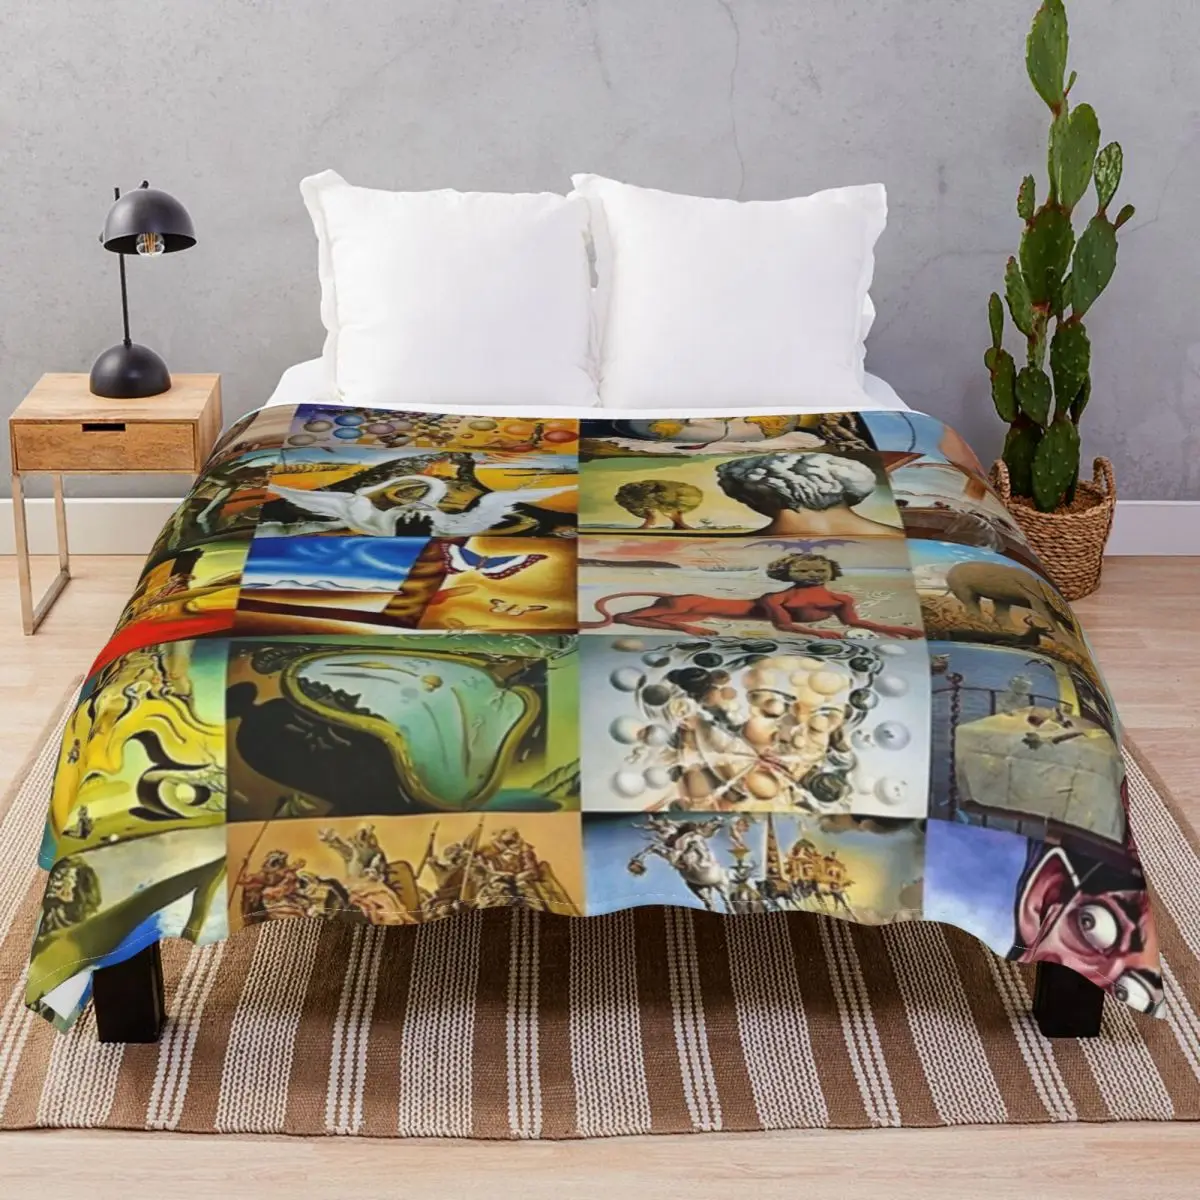 

Salvador Dali All Paintings Collage Blanket Flannel Spring/Autumn Fluffy Throw Blankets for Bed Sofa Travel Office